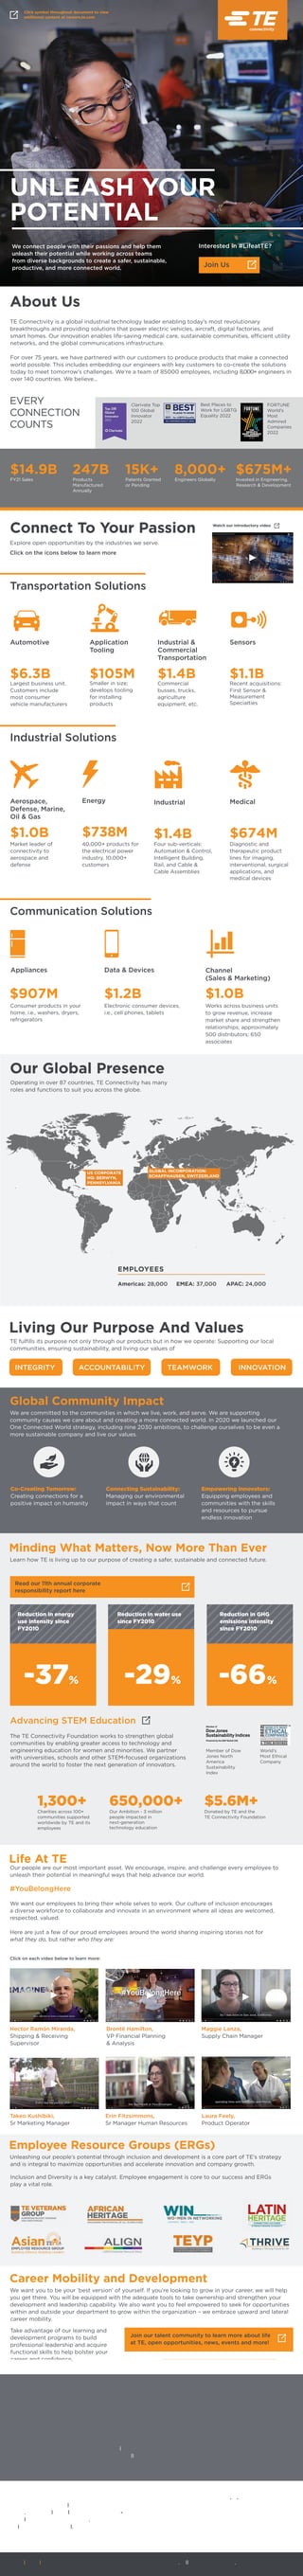 Living Our Purpose And Values
TE fulfills its purpose not only through our products but in how we operate: Supporting our local
communities, ensuring sustainability, and living our values of
Global Community Impact
We are committed to the communities in which we live, work, and serve. We are supporting
community causes we care about and creating a more connected world. In 2020 we launched our
One Connected World strategy, including nine 2030 ambitions, to challenge ourselves to be even a
more sustainable company and live our values.
Minding What Matters, Now More Than Ever
Learn how TE is living up to our purpose of creating a safer, sustainable and connected future.
Advancing STEM Education
The TE Connectivity Foundation works to strengthen global
communities by enabling greater access to technology and
engineering education for women and minorities. We partner
with universities, schools and other STEM-focused organizations
around the world to foster the next generation of innovators.
Career Mobility and Development
We want you to be your ‘best version’ of yourself. If you’re looking to grow in your career, we will help
you get there. You will be equipped with the adequate tools to take ownership and strengthen your
development and leadership capability. We also want you to feel empowered to seek for opportunities
within and outside your department to grow within the organization – we embrace upward and lateral
career mobility.
Take advantage of our learning and
development programs to build
professional leadership and acquire
functional skills to help bolster your
career and confidence.
Employee Resource Groups (ERGs)
Unleashing our people’s potential through inclusion and development is a core part of TE’s strategy
and is integral to maximize opportunities and accelerate innovation and company growth.
Inclusion and Diversity is a key catalyst. Employee engagement is core to our success and ERGs
play a vital role.
Connect To Your Passion
Explore open opportunities by the industries we serve.
Click on the icons below to learn more
We connect people with their passions and help them
unleash their potential while working across teams
from diverse backgrounds to create a safer, sustainable,
productive, and more connected world.
Equal Employment Opportunity © 2022 TE Connectivity. All Rights Reserved.
Click on each video below to learn more:
Erin Fitzsimmons,
Sr Manager Human Resources
Laura Feely,
Product Operator
Hector Ramón Miranda,
Shipping & Receiving
Supervisor
Brontë Hamilton,
VP Financial Planning
& Analysis
Maggie Lanza,
Supply Chain Manager
Takeo Kushibiki,
Sr Marketing Manager
Speak with
a recruiter
Meet with
a hiring
manager
Evaluate
your skills
Meet with
the team
We make We prepare
you for Day 1
Recruitment Process
UNLEASH YOUR
POTENTIAL
$14.9B
FY21 Sales
247B
Products
Manufactured
Annually
15K+
Patents Granted
or Pending
8,000+
Engineers Globally
$675M+
Invested in Engineering,
Research & Development
INTEGRITY ACCOUNTABILITY TEAMWORK INNOVATION
Co-Creating Tomorrow:
Creating connections for a
positive impact on humanity
Connecting Sustainability:
Managing our environmental
impact in ways that count
Empowering Innovators:
Equipping employees and
communities with the skills
and resources to pursue
endless innovation
Interested in #LifeatTE?
Read our 11th annual corporate
responsibility report here
Connect with Us
Remember, our people are our most important
asset. We are always looking for forward-thinkers
to help advance connectivity. We invite you to
Unleash Your Potential.
-37% -29% -66%
Reduction in energy
use intensity since
FY2010
Reduction in water use
since FY2010
Reduction in GHG
emissions intensity
since FY2010
Life At TE
Our people are our most important asset. We encourage, inspire, and challenge every employee to
unleash their potential in meaningful ways that help advance our world.
#YouBelongHere
We want our employees to bring their whole selves to work. Our culture of inclusion encourages
a diverse workforce to collaborate and innovate in an environment where all ideas are welcomed,
respected, valued.
Here are just a few of our proud employees around the world sharing inspiring stories not for
what they do, but rather who they are:
Asian
EMPLOYEE RESOURCE GROUP
Building Alliance. Building Leaders
Join our talent community to learn more about life
at TE, open opportunities, news, events and more!
Transportation Solutions
Automotive
$6.3B
Largest business unit.
Customers include
most consumer
vehicle manufacturers
Industrial &
Commercial
Transportation
$1.4B
Commercial
busses, trucks,
agriculture
equipment, etc.
Application
Tooling
$105M
Smaller in size;
develops tooling
for installing
products
Sensors
$1.1B
Recent acquisitions:
First Sensor &
Measurement
Specialties
Industrial Solutions
Aerospace,
Defense, Marine,
Oil & Gas
$1.0B
Market leader of
connectivity to
aerospace and
defense
Energy
$738M
40,000+ products for
the electrical power
industry. 10,000+
customers
Medical
$674M
Diagnostic and
therapeutic product
lines for imaging,
interventional, surgical
applications, and
medical devices
Industrial
$1.4B
Four sub-verticals:
Automation & Control,
Intelligent Building,
Rail, and Cable &
Cable Assemblies
Communication Solutions
Appliances
$907M
Consumer products in your
home, i.e., washers, dryers,
refrigerators
Channel
(Sales & Marketing)
$1.0B
Works across business units
to grow revenue, increase
market share and strengthen
relationships; approximately
500 distributors; 650
associates
Data & Devices
$1.2B
Electronic consumer devices,
i.e., cell phones, tablets
About Us
TE Connectivity is a global industrial technology leader enabling today’s most revolutionary
breakthroughs and providing solutions that power electric vehicles, aircraft, digital factories, and
networks, and the global communications infrastructure.
For over 75 years, we have partnered with our customers to produce products that make a connected
world possible. This includes embedding our engineers with key customers to co-create the solutions
today to meet tomorrow’s challenges. We’re a team of 85000 employees, including 8,000+ engineers in
over 140 countries. We believe...
Our Global Presence
Operating in over 87 countries, TE Connectivity has many
roles and functions to suit you across the globe.
Learn more at careers.te.com
US CORPORATE
HQ: BERWYN,
PENNSYLVANIA
GLOBAL INCORPORATION:
SCHAFFHAUSEN, SWITZERLAND
Member of Dow
Jones North
America
Sustainability
Index
World’s
Most Ethical
Company
Clarivate Top
100 Global
Innovator
2022
FORTUNE
World’s
Most
Admired
Companies
2022
Click symbol throughout document to view
additional content at careers.te.com
EVERY
CONNECTION
COUNTS
Join Us
Watch our introductory video
EMPLOYEES
Americas: EMEA: APAC: 24,000
24x7
LIVE CHAT
37,000
28,000
1,300+
Charities across 100+
communities supported
worldwide by TE and its
employees
$5.6M+
Donated by TE and the
TE Connectivity Foundation
650,000+
Our Ambition - 3 million
people impacted in
next-generation
technology education
Best Places to
Work for LGBTQ
Equality 2022
 